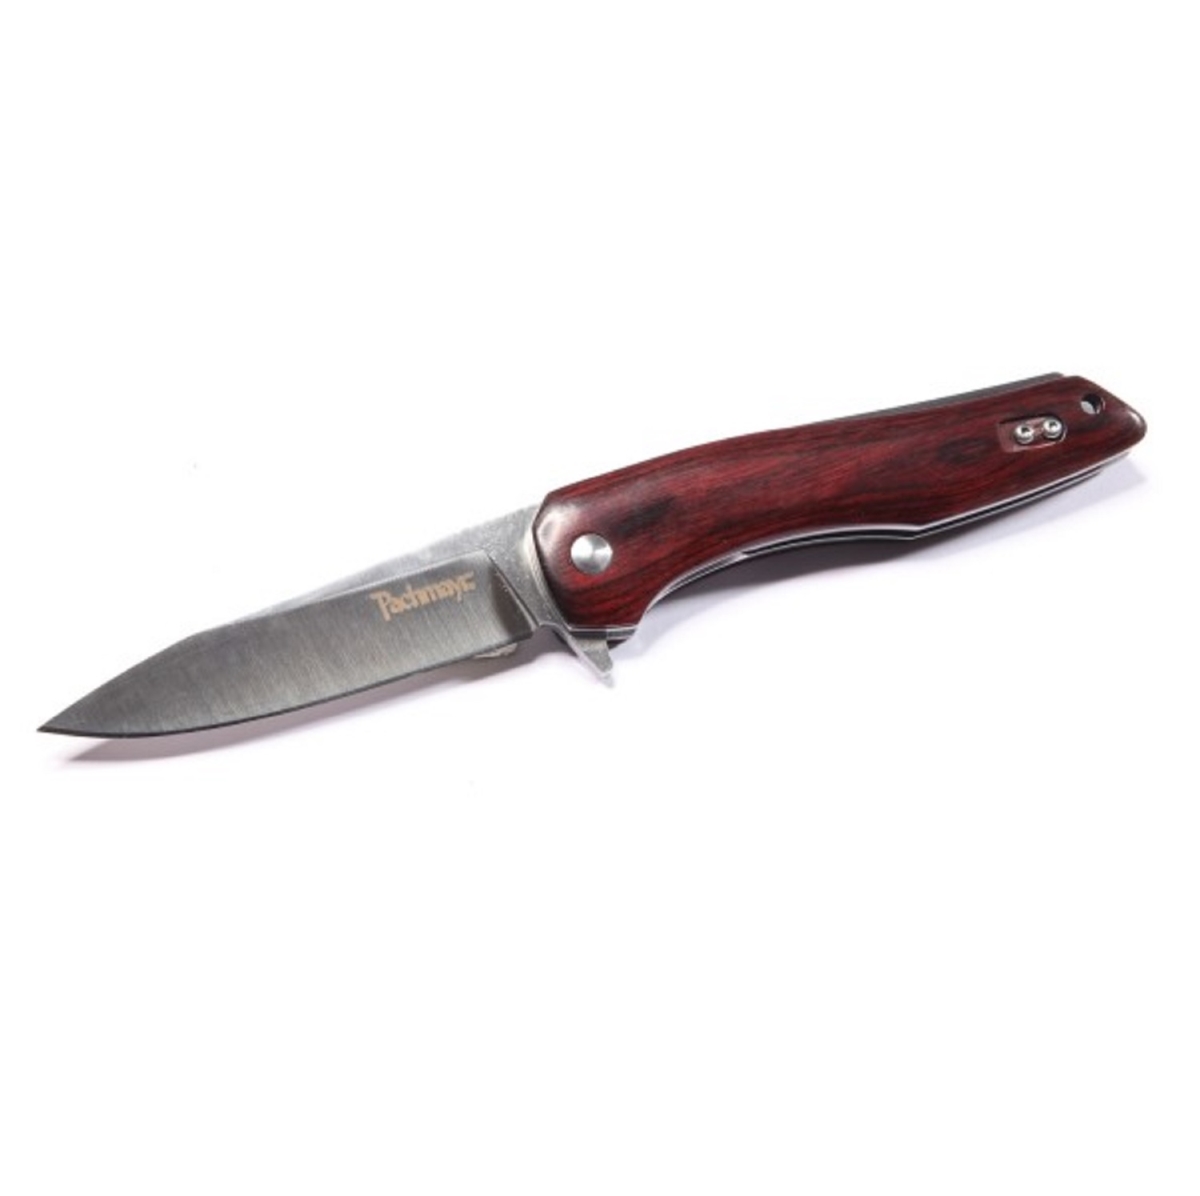 4019398 3.45 In. Griffin Folder Knife Blade With Wood Handle